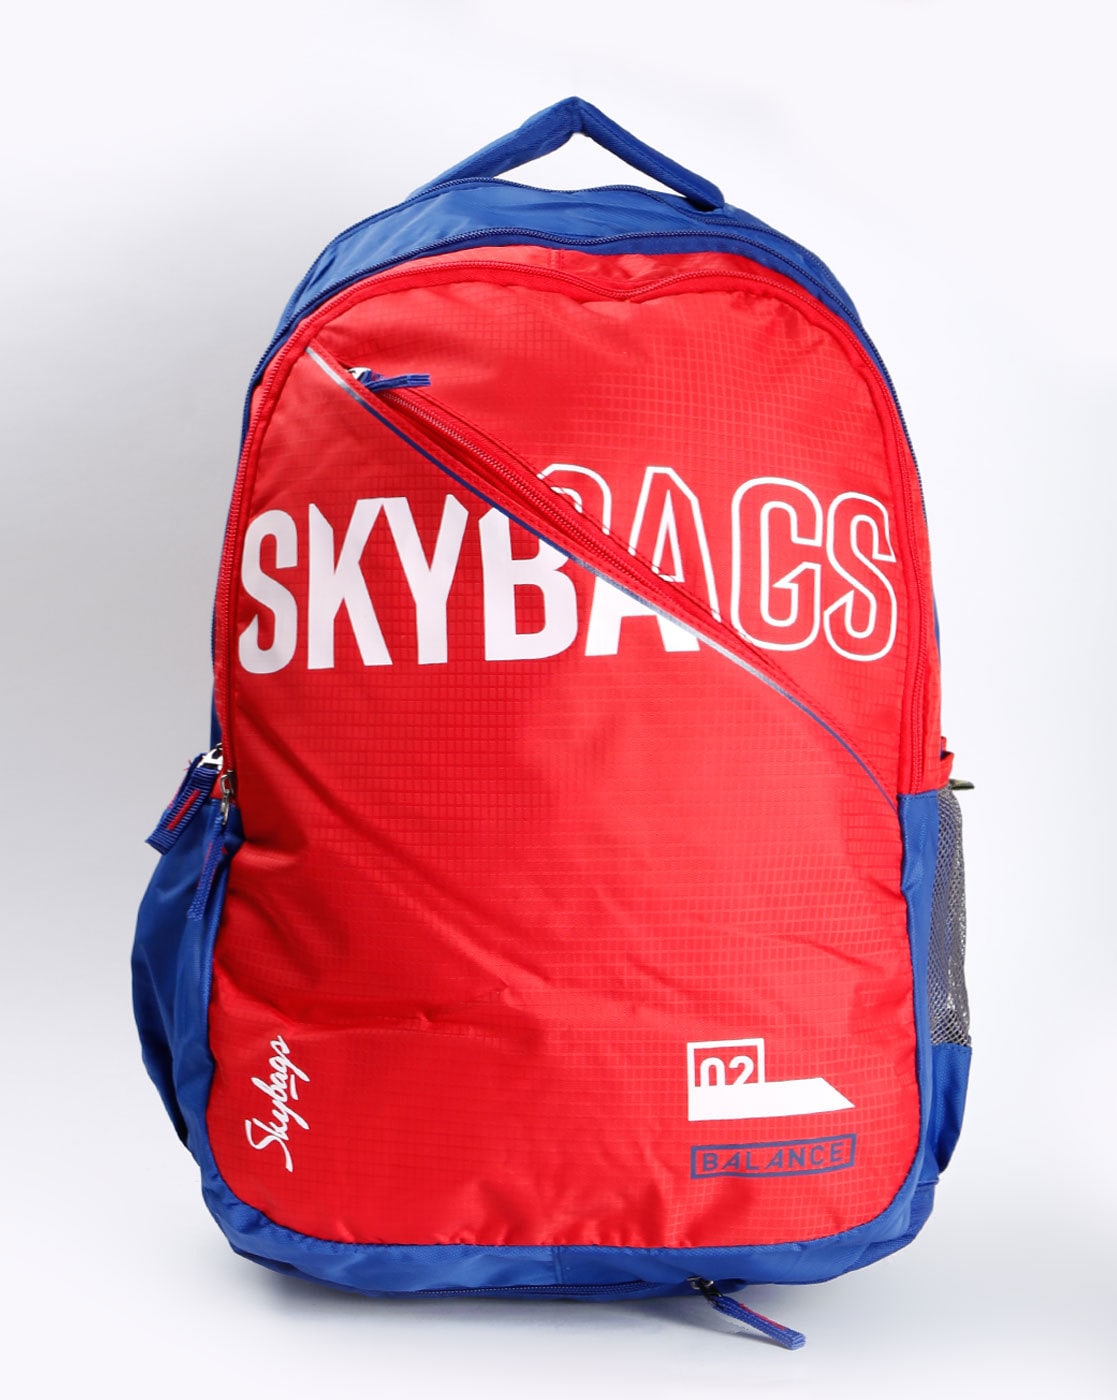 Skybags Offroader 